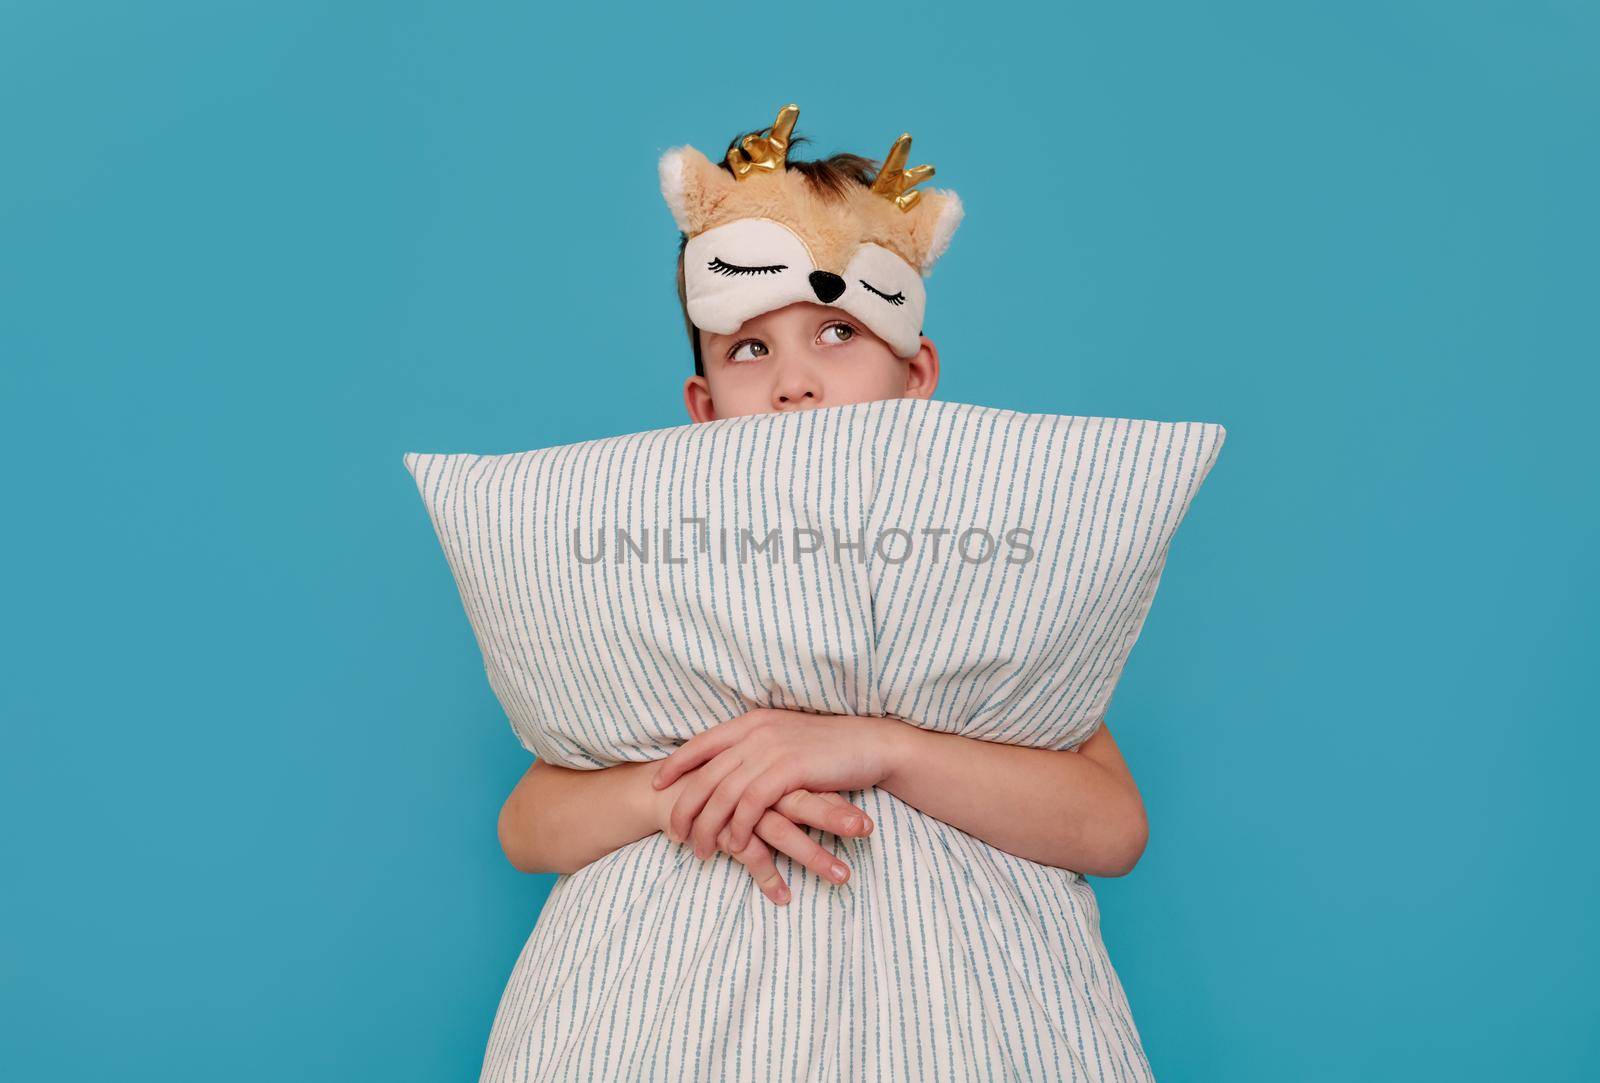 A cunning boy in a sleep mask on a blue background hugs a pillow, copy-paste by Ramanouskaya